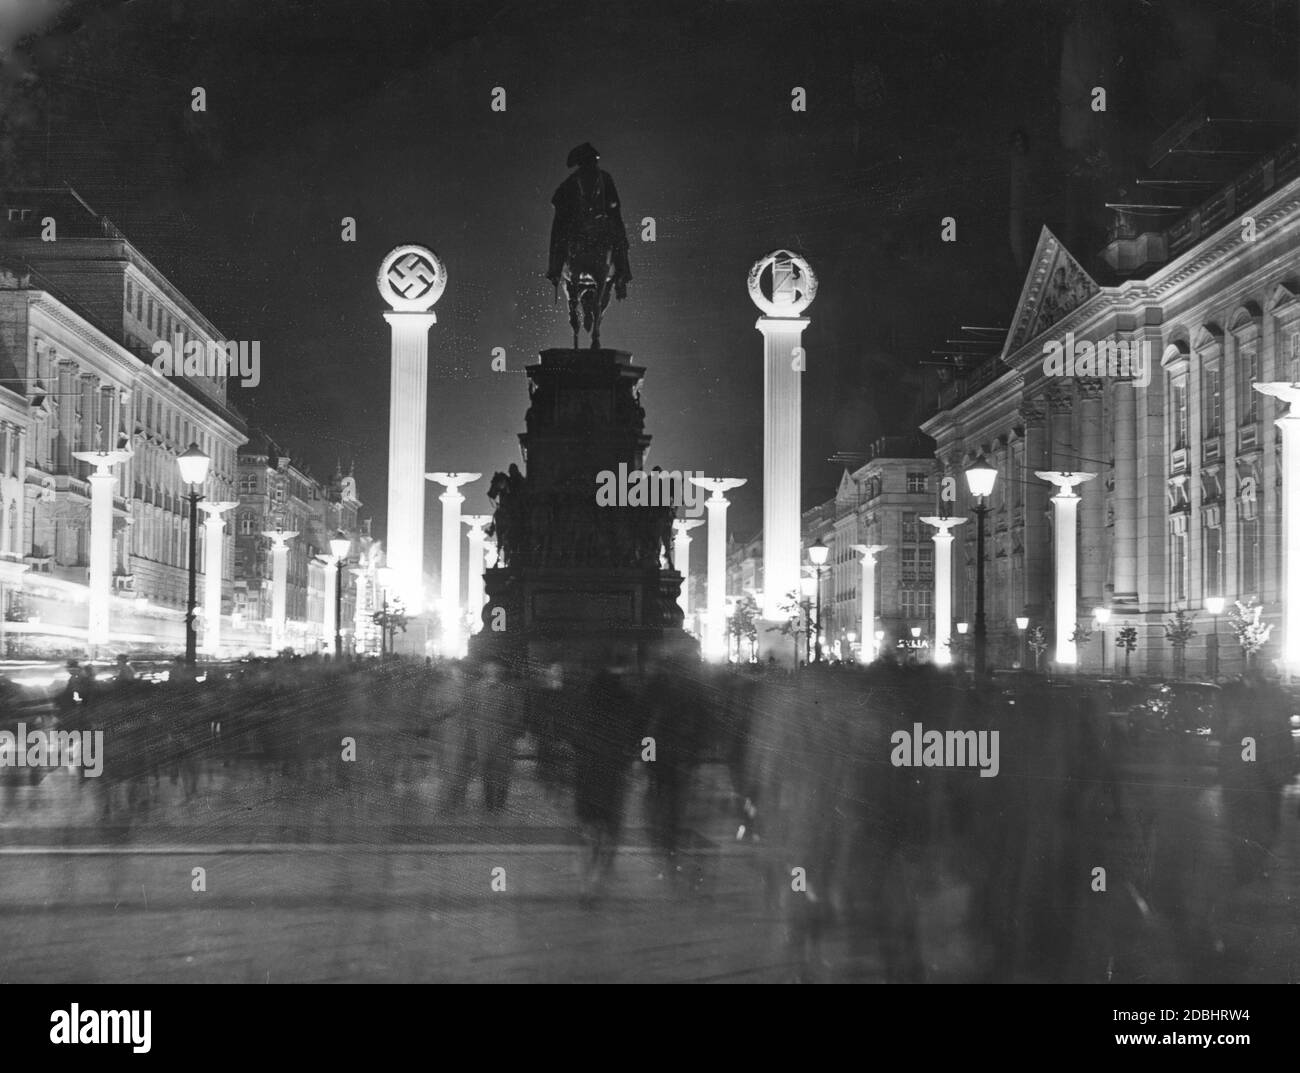 Benito Mussolini visited Germany between September 25 and 29, 1937. The picture shows the test illumination of the columns with Nazi symbols in the street Unter den Linden in Berlin before the visit of the Duce. The equestrian statue of Frederick the Great stands out in darkness. On the right is the Staatsbibliothek. Stock Photo